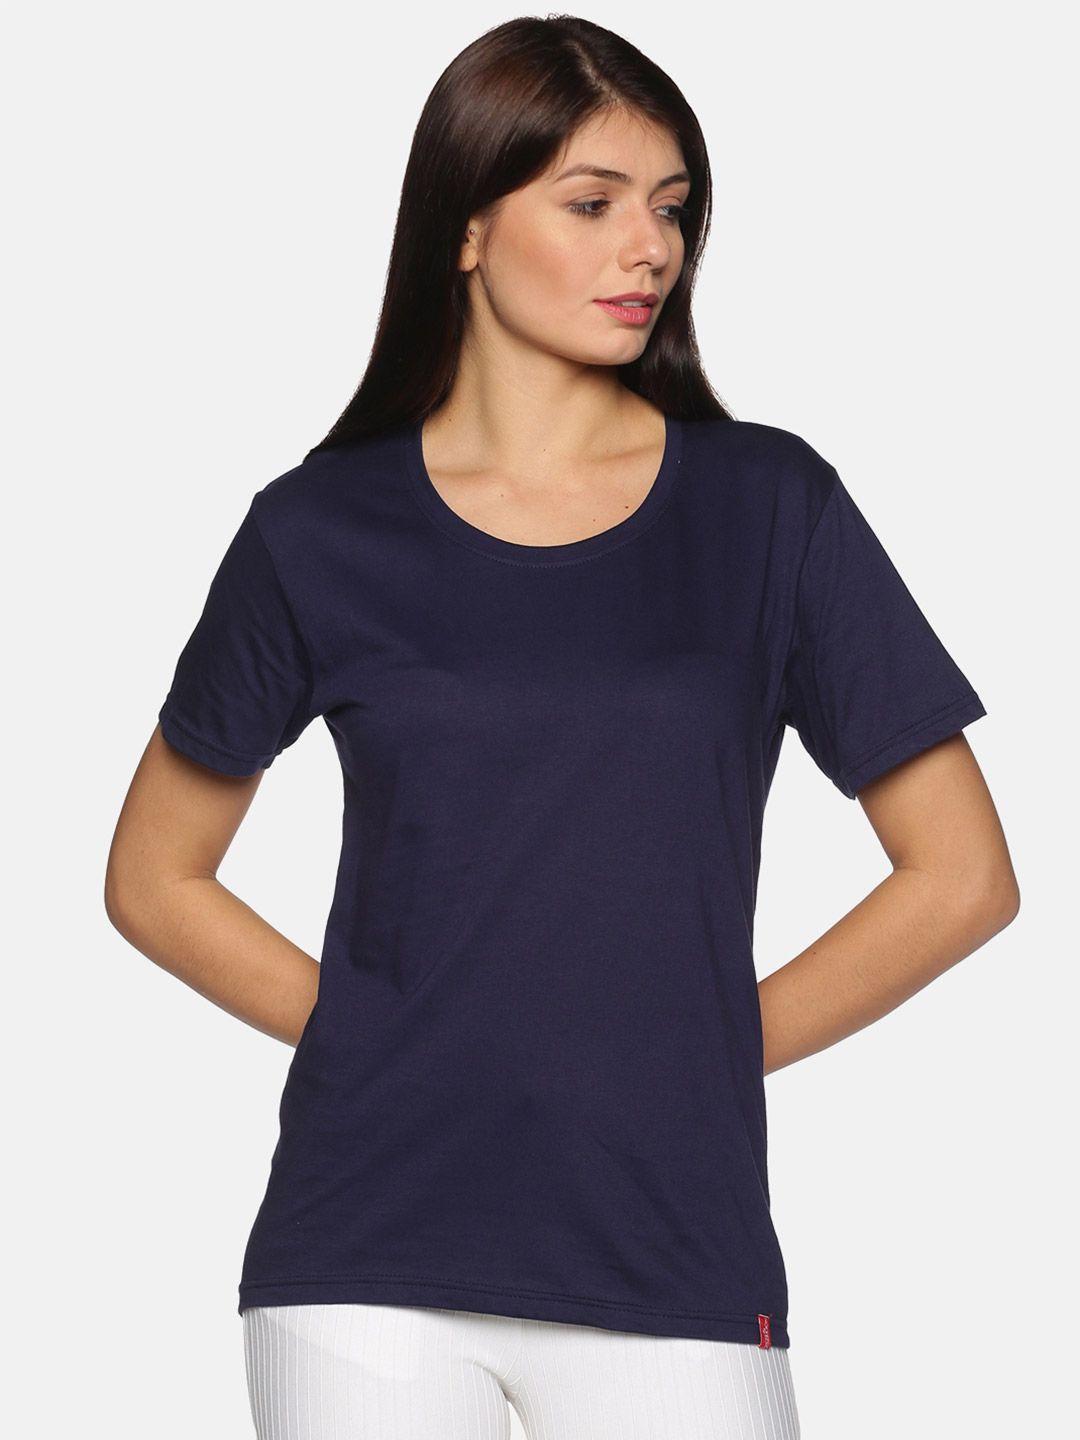 NOT YET by us Women Navy Blue Cotton T-shirt